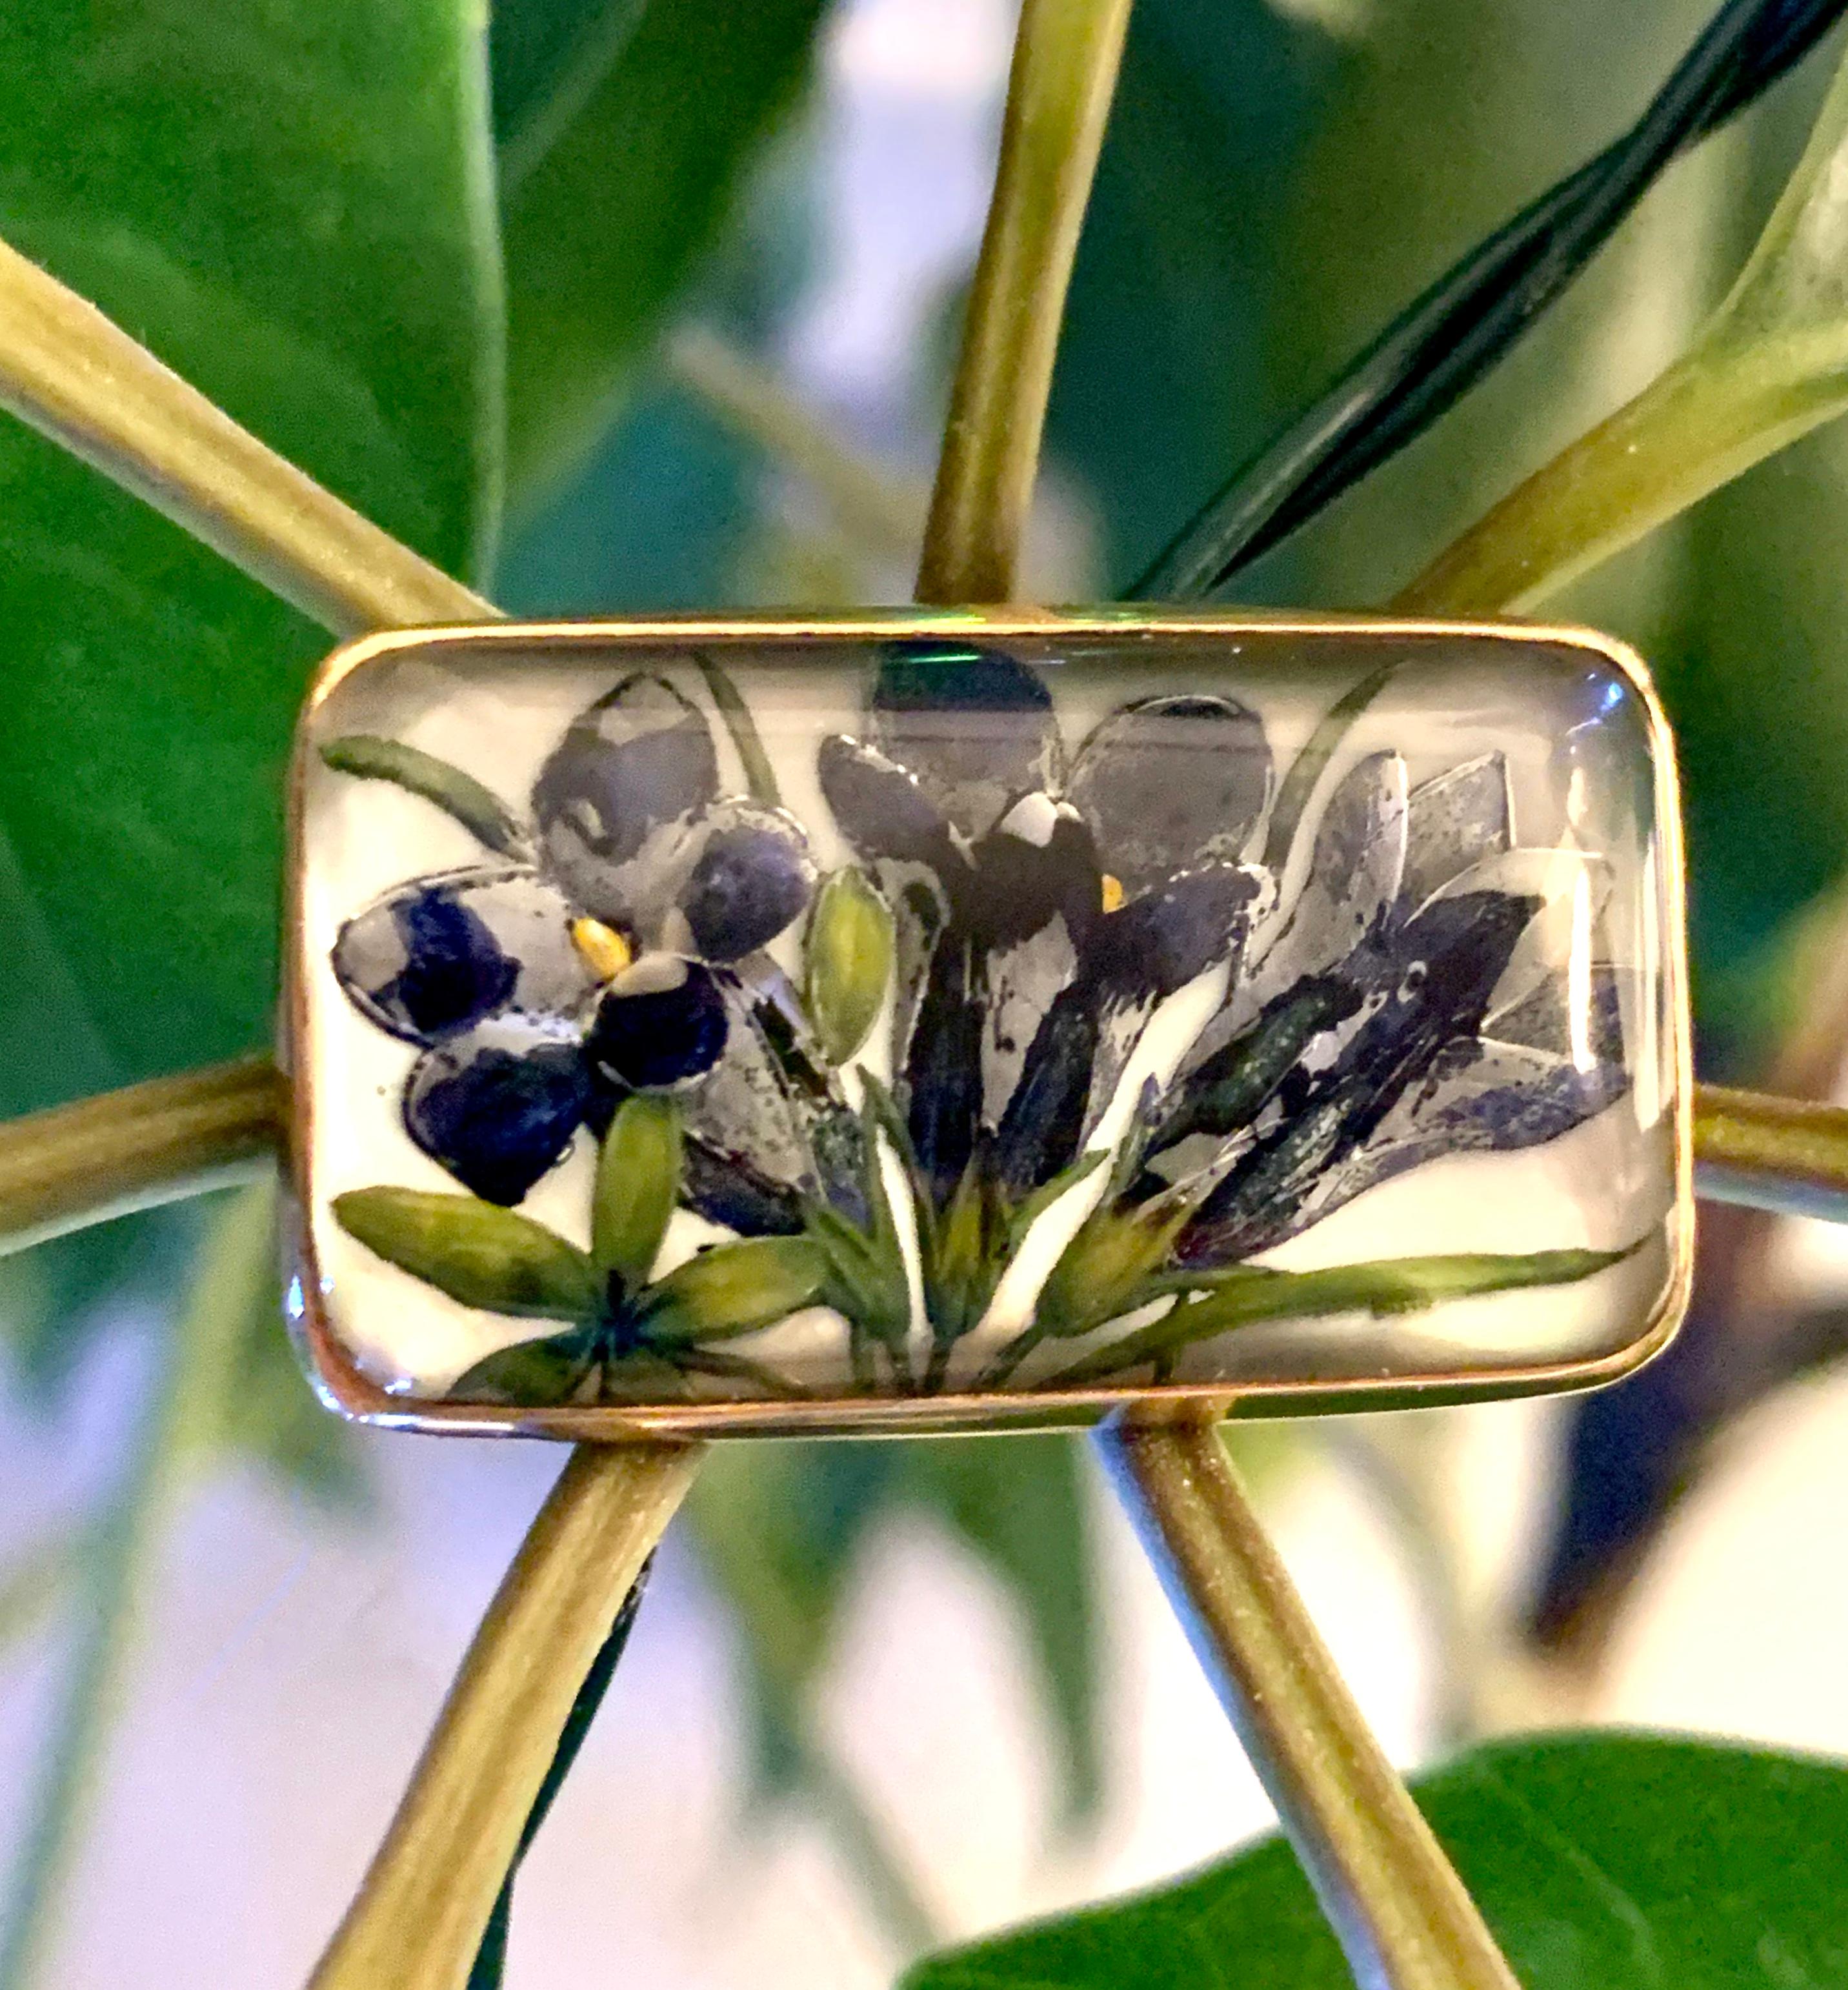 This intriguing 1920's Essex Crystal Glass brooch/pin features a depiction of a floral bouquet of Iris flowers.  Essex Crystal is sometimes referred to as a 